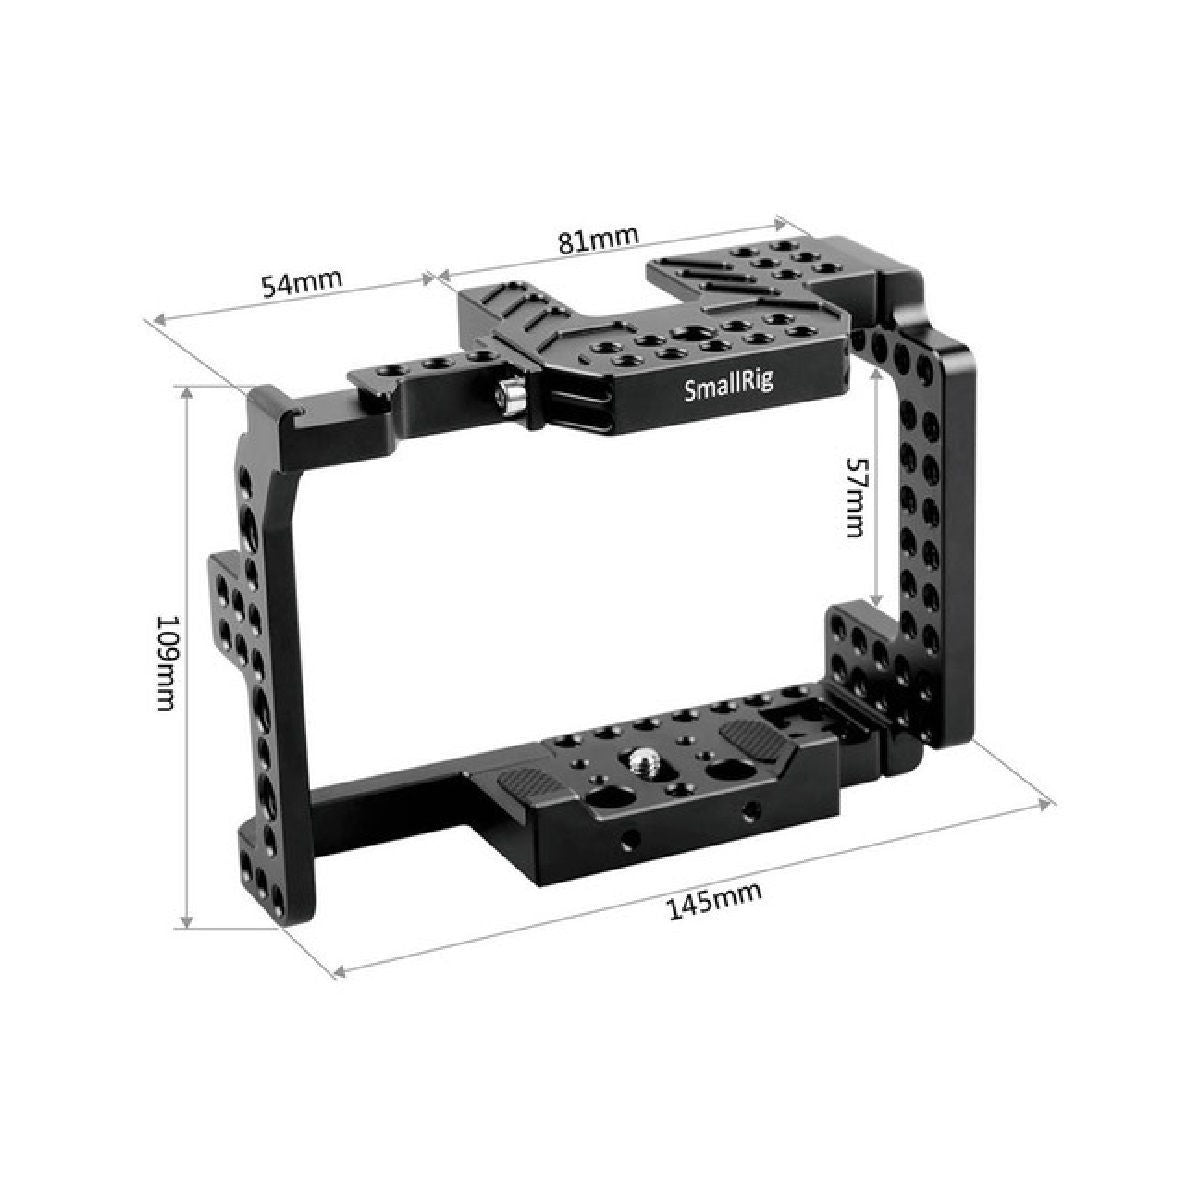 Smallrig 1660 Cage for Sony A7 II Series Cameras